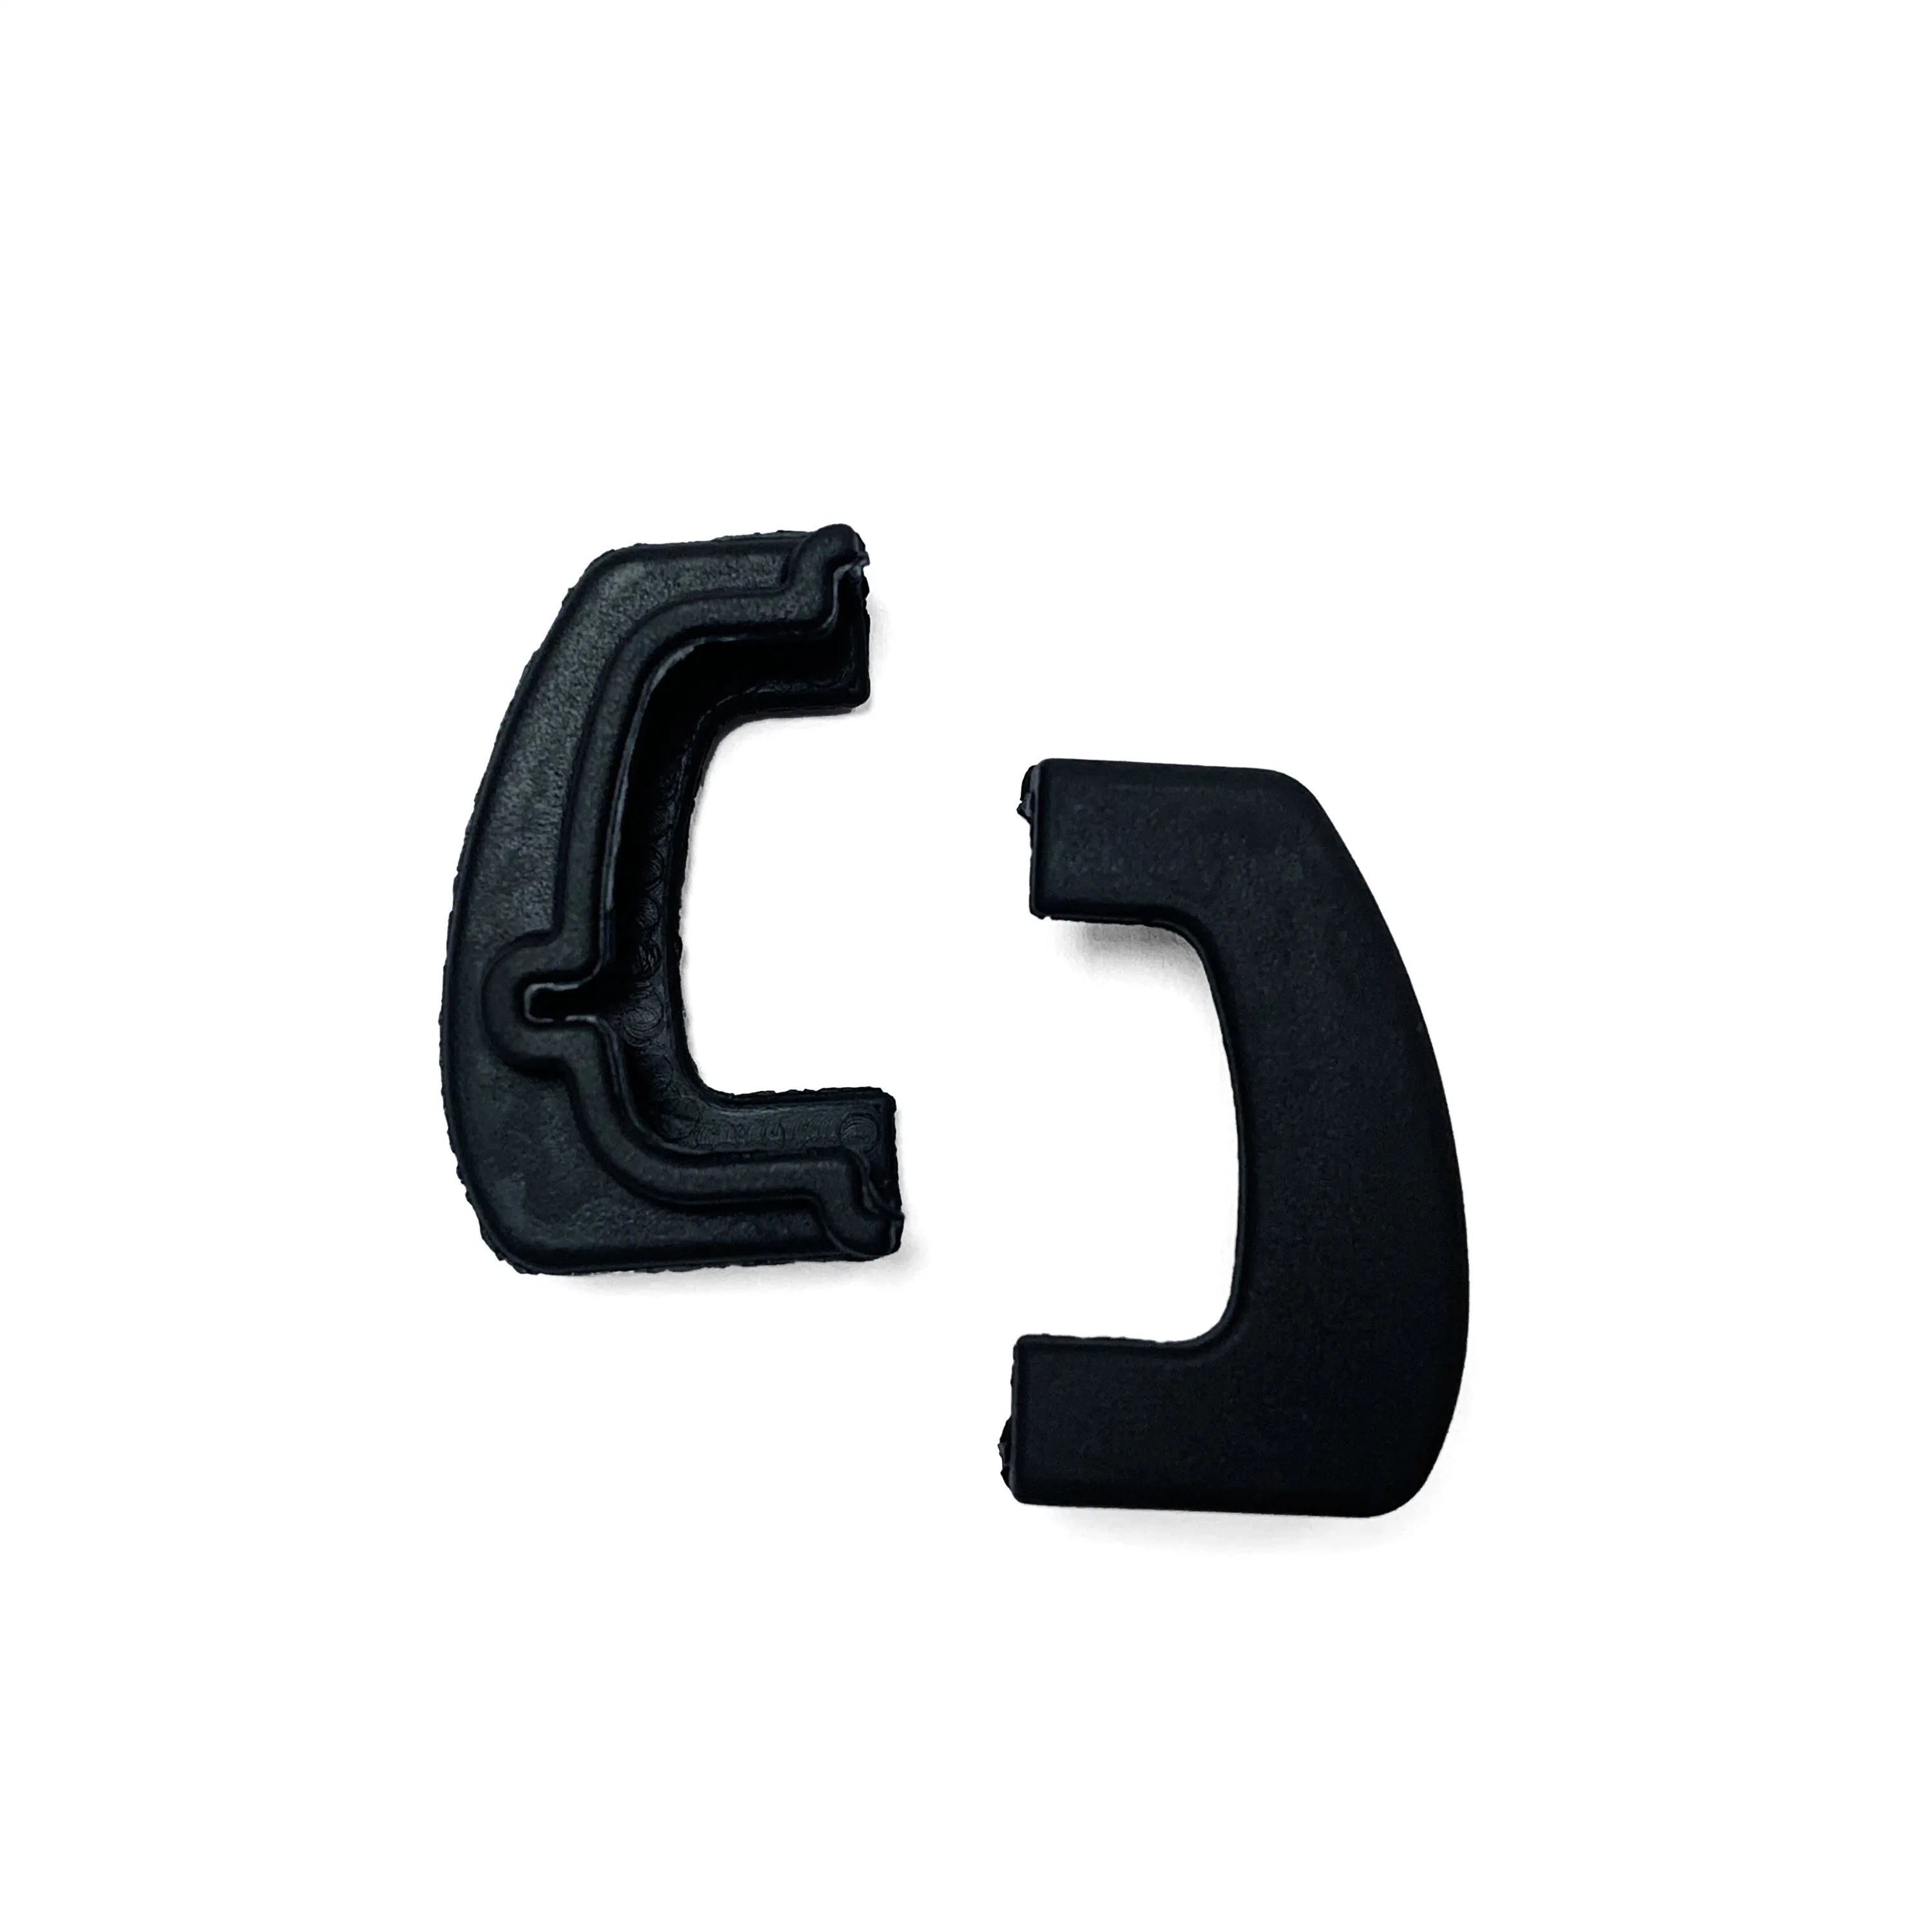 Custom Rubber Parts Rubber Sheath Moulding Rubber Parts for Power Tools